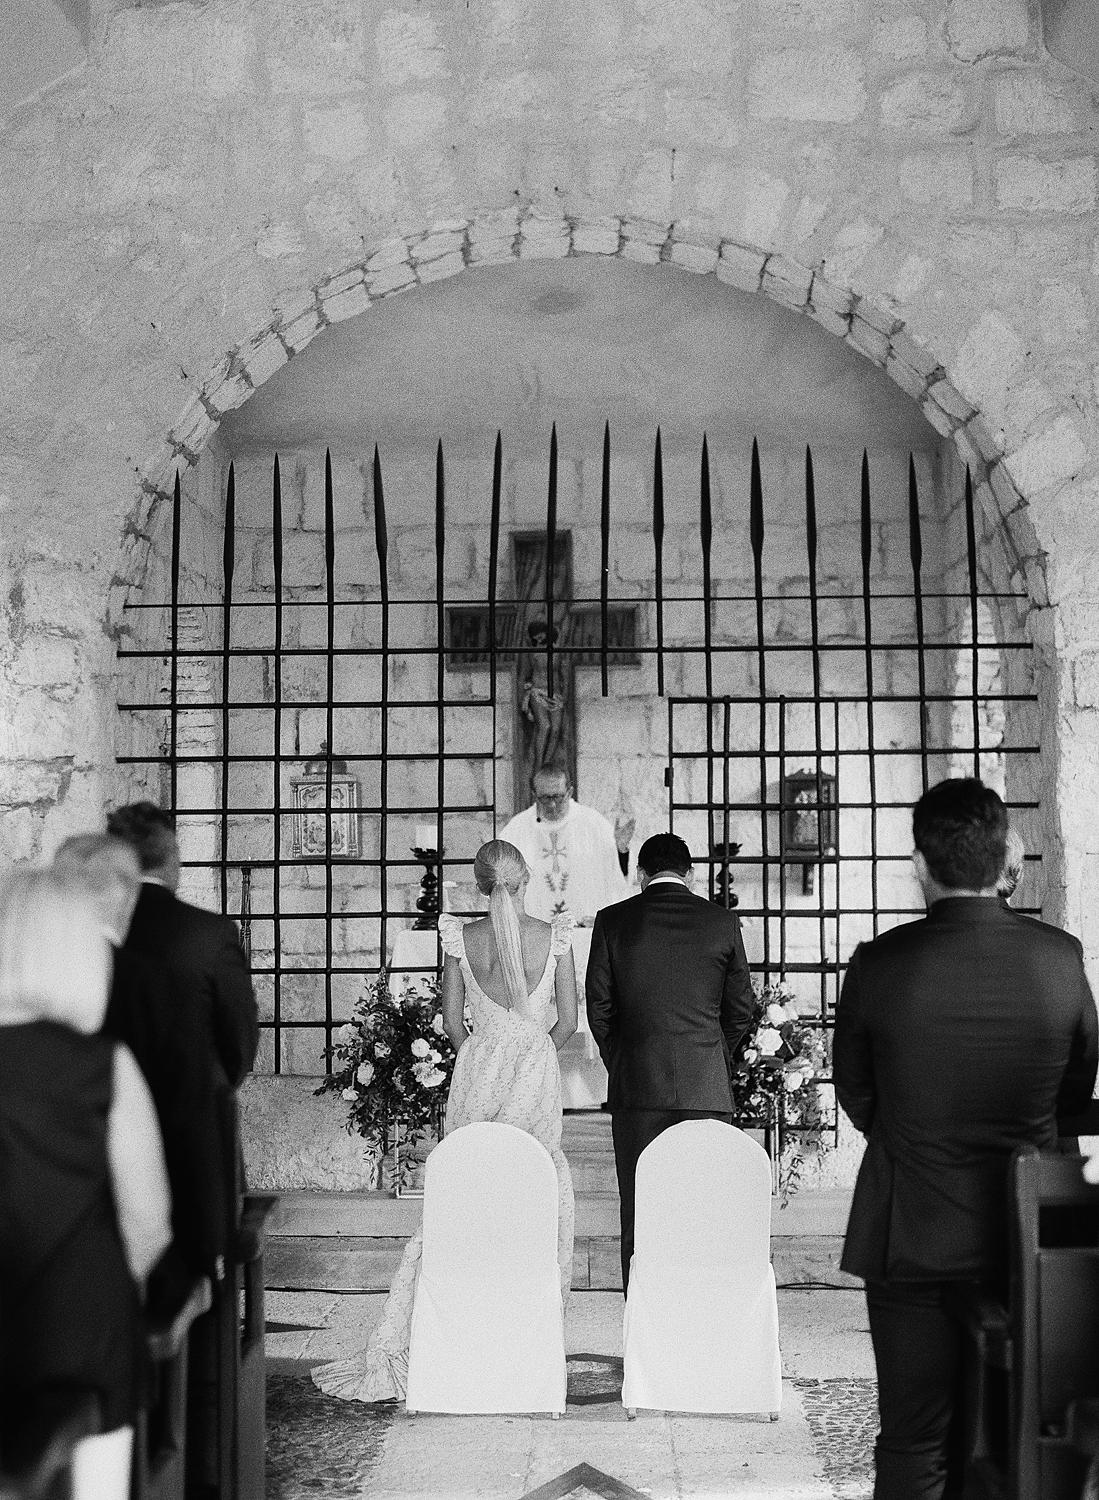 Bride and groom standing together during private family ceremony at Altos De Chavon.